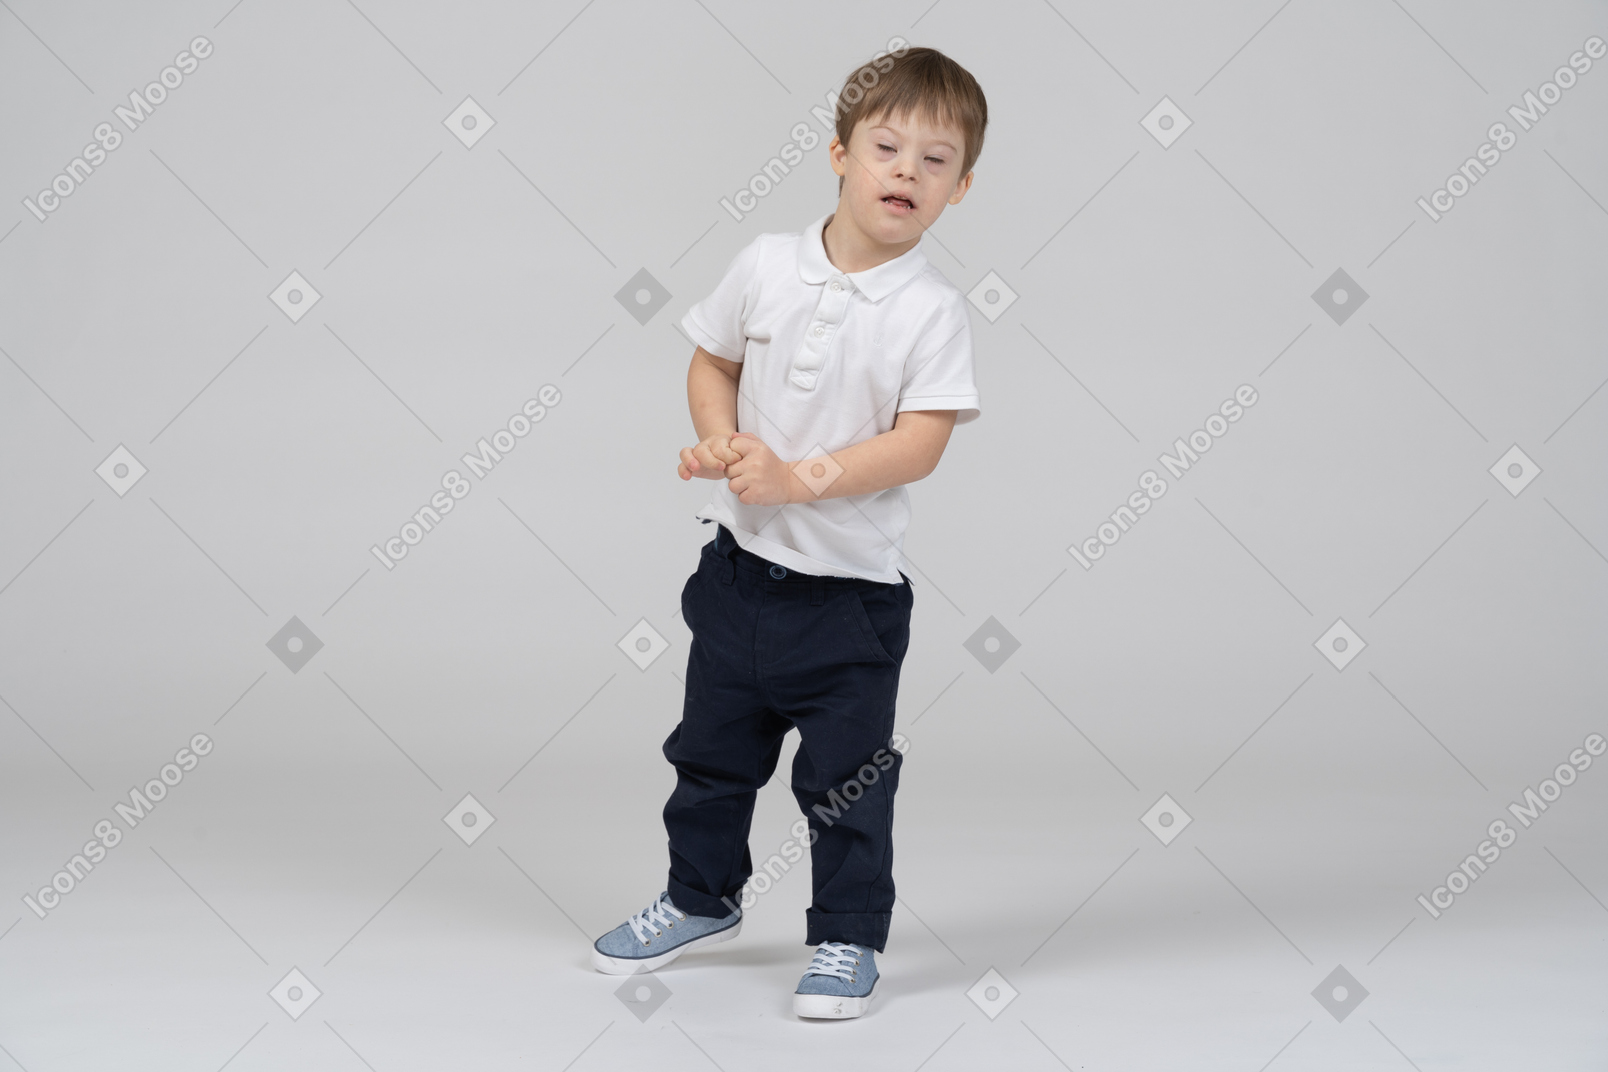 Little boy standing with his eyes closed